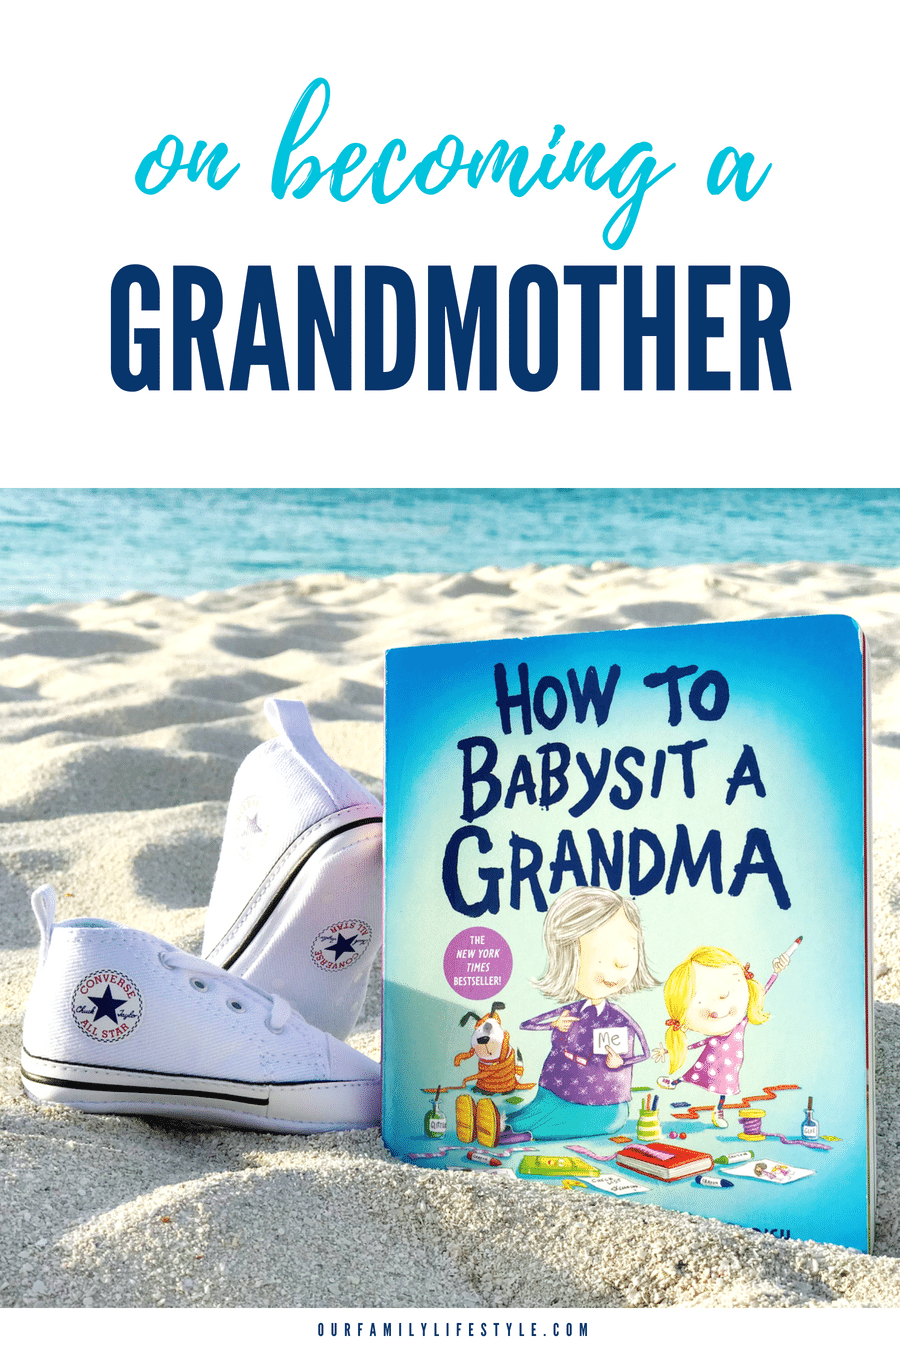 on becoming a grandmother